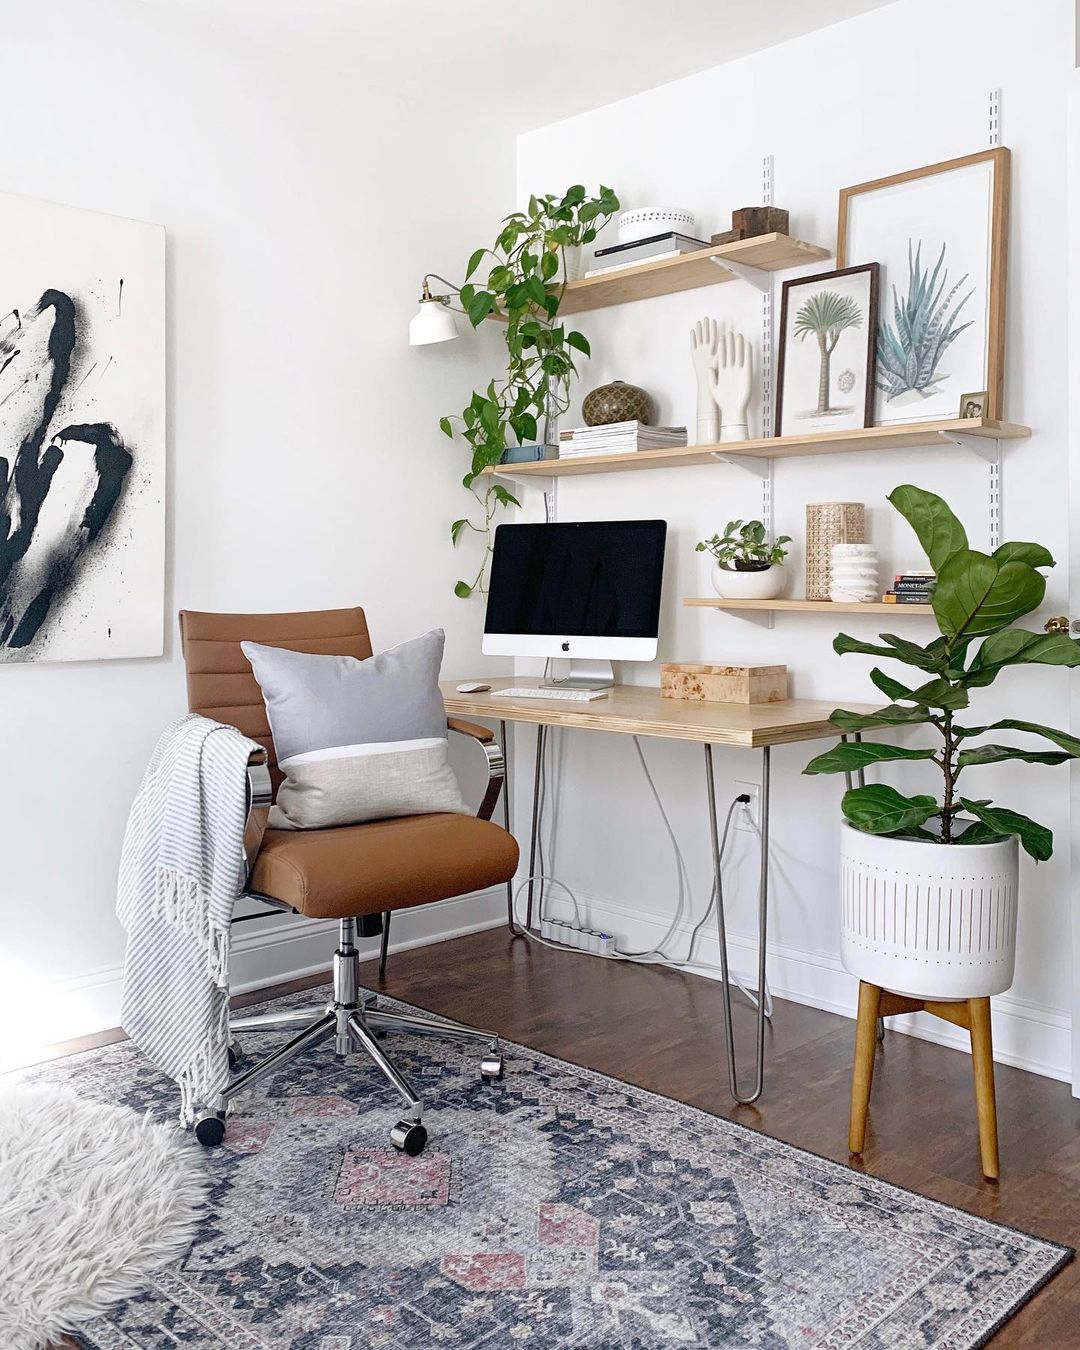 A light, bright home office space with a wooden desk and shelving on the wall above it. Photo by Instagram user @kcdesignco.